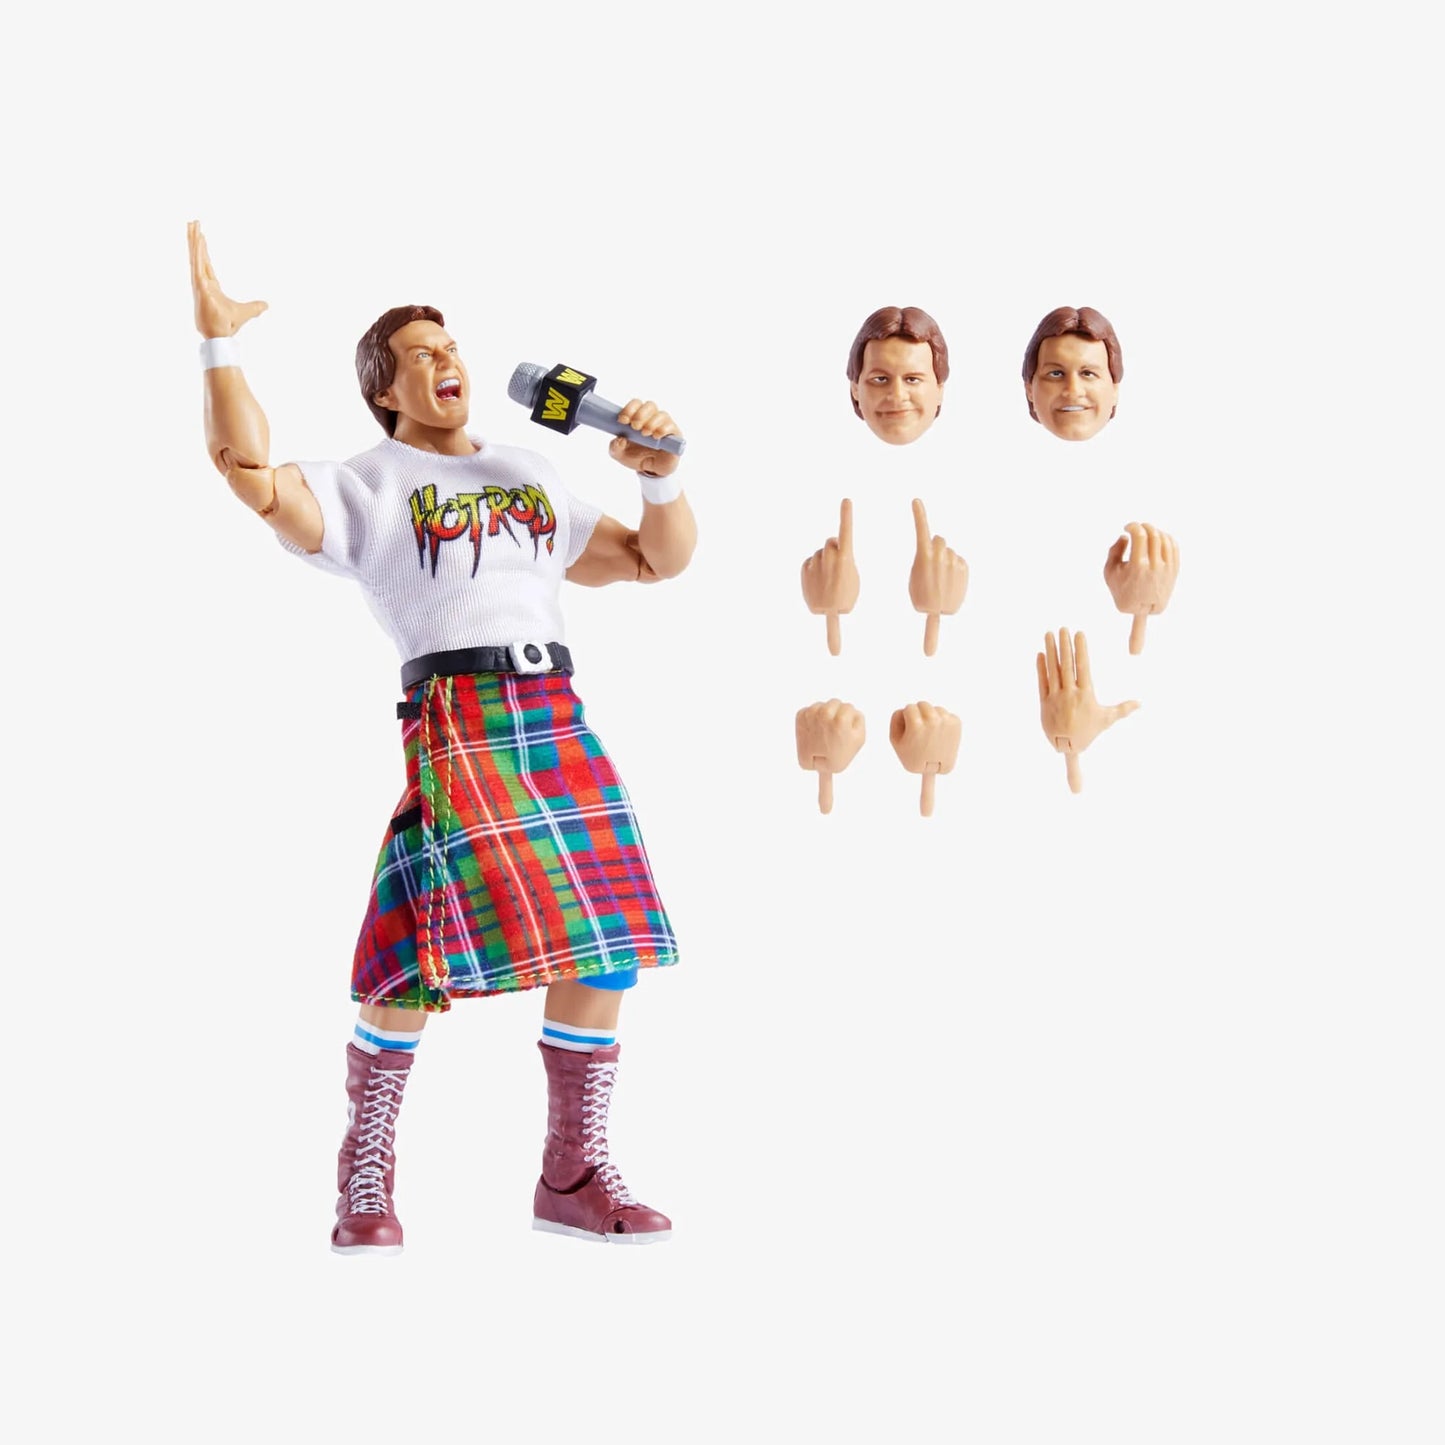 WWE Coliseum Collection “Rowdy" Roddy Piper & George "The Animal" Steele Ultimate Edition